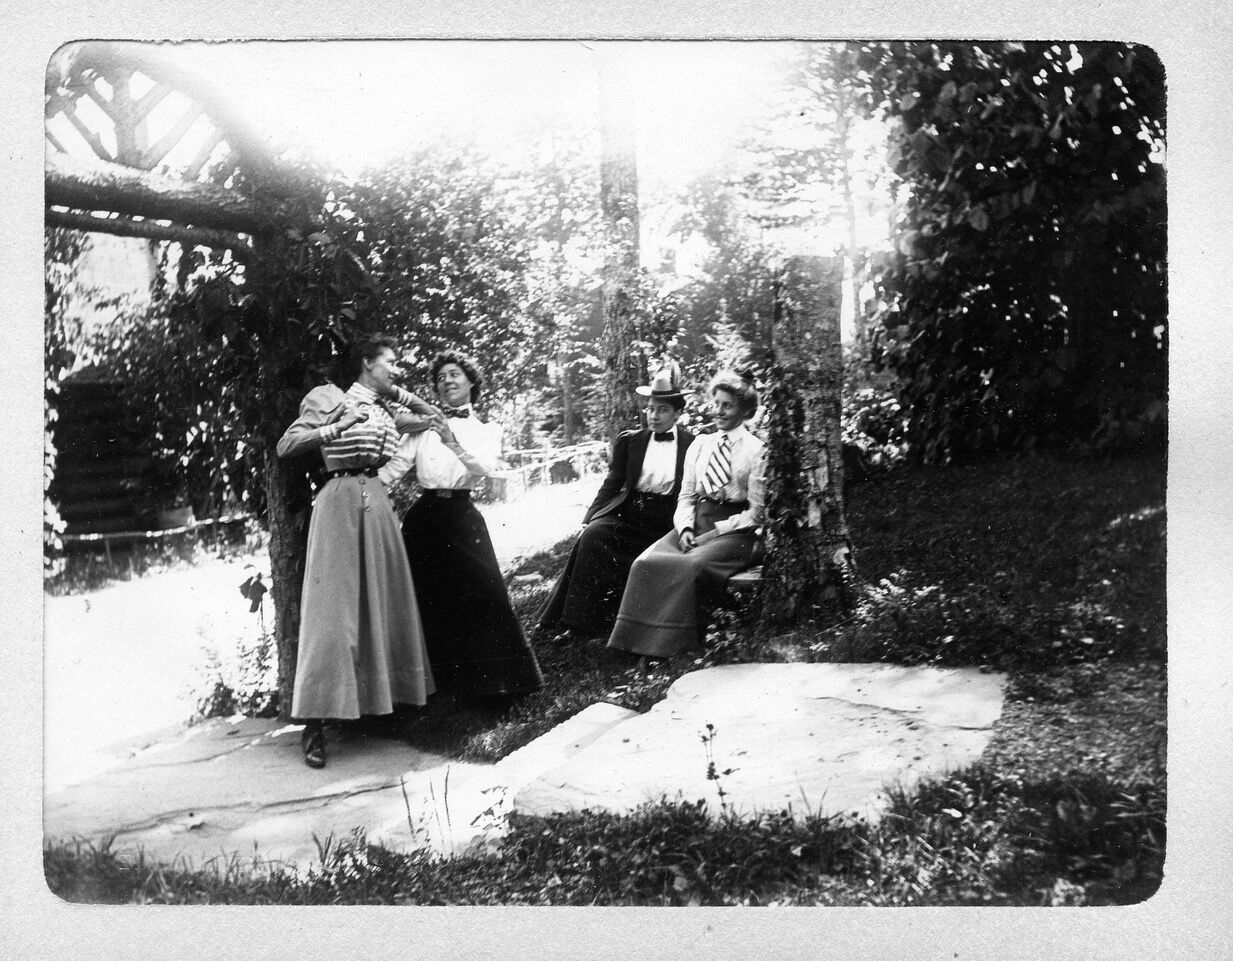 Gertrude Tate, second from left wearing white shirt and bow tie, and Alice Austen, third from left, seated, wearing white shirt and bow tie, enjoyed a trip to the Catskills in 1899. Austen made the photo album for Tate.